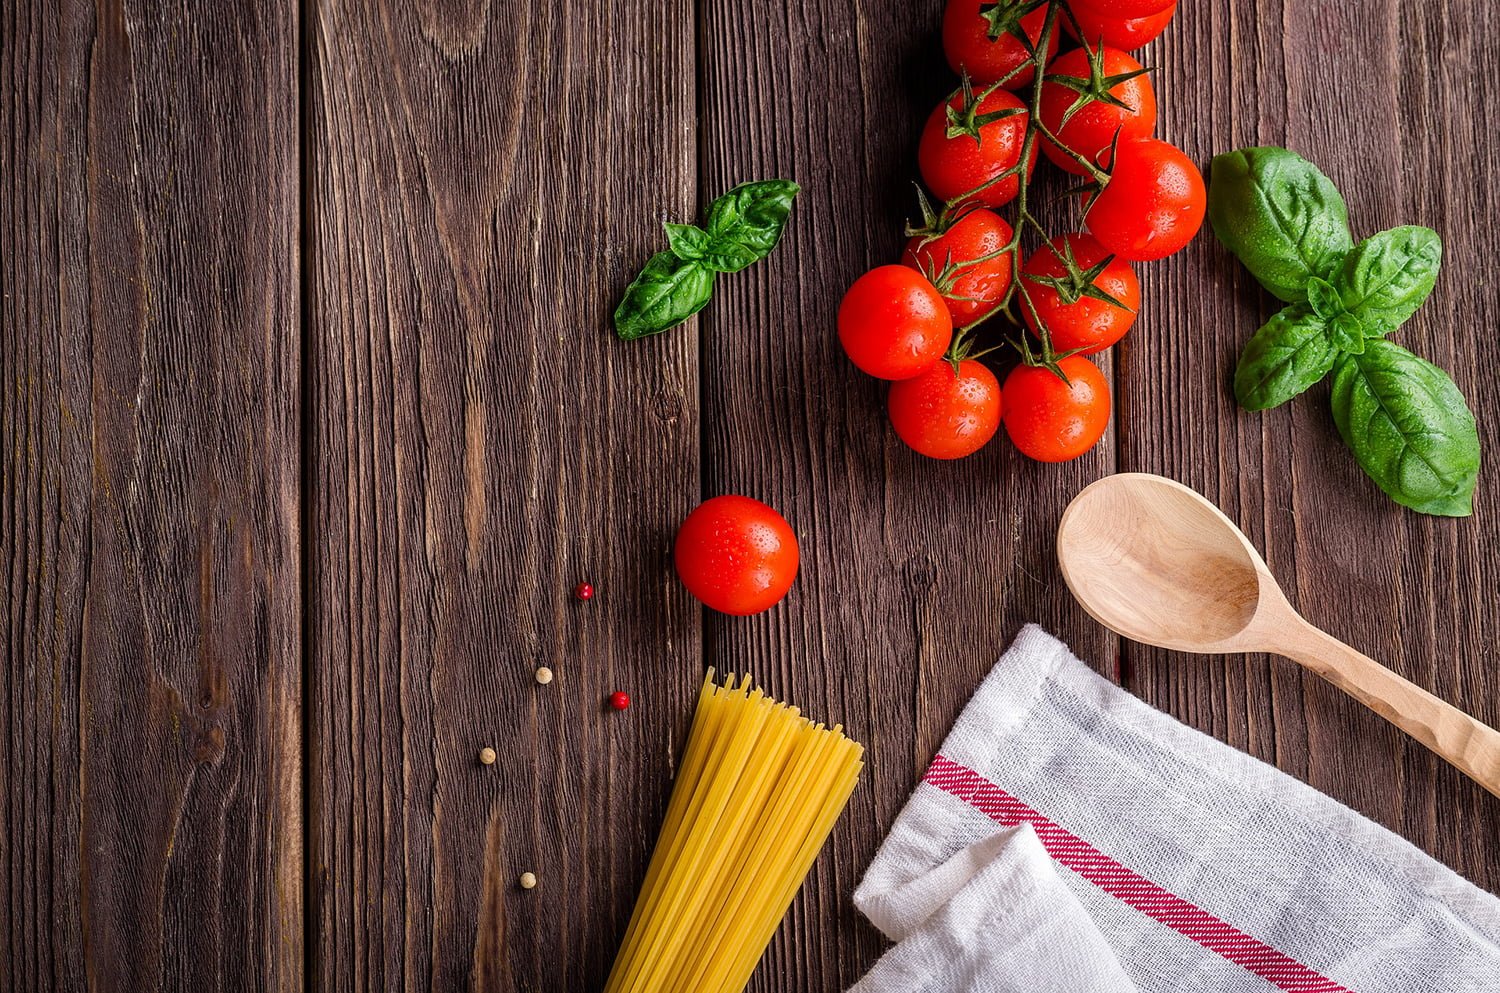 Wooden table with pasta, basil and tomatoes